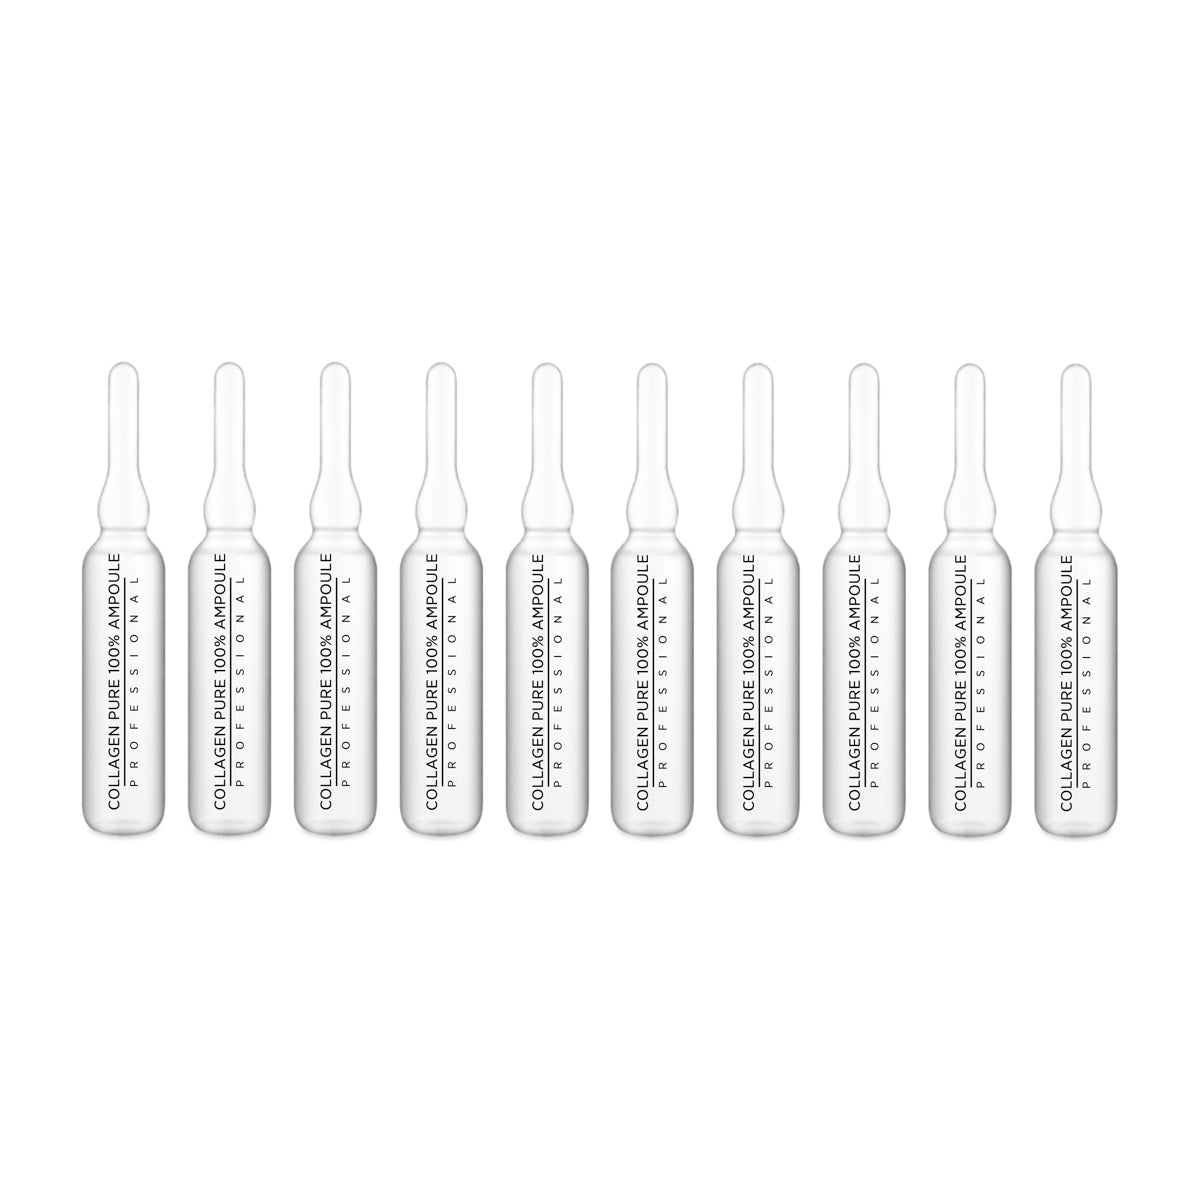 Syis pure collagen ampoules 100% 10x3 ml